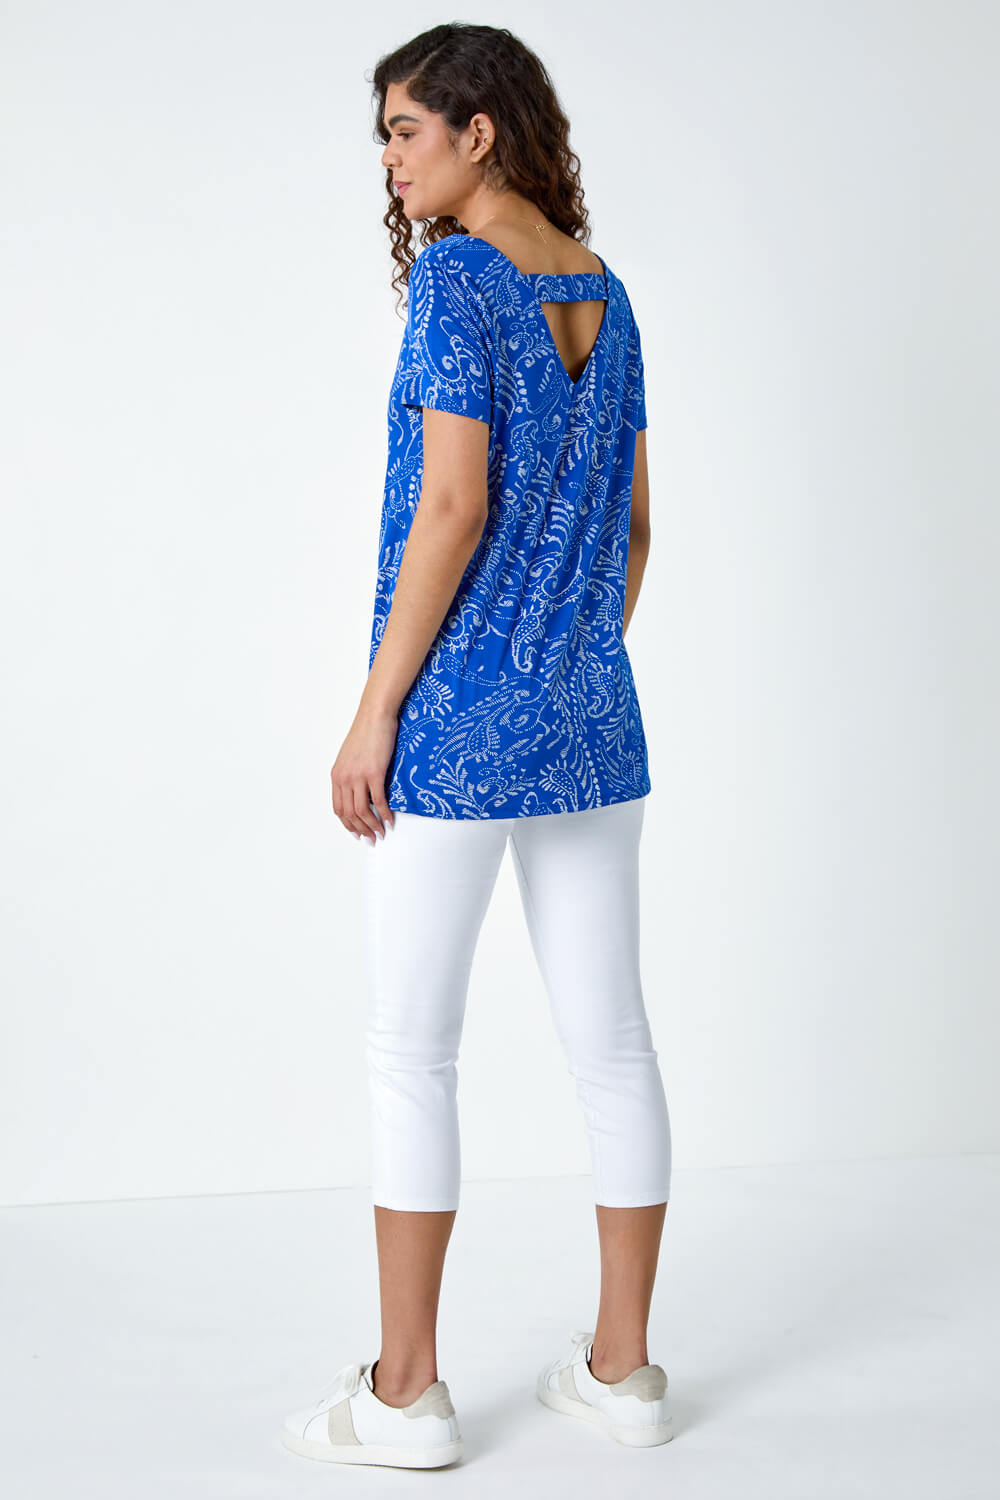 Blue Paisley Bar Back Stretch Tunic Top, Image 3 of 5